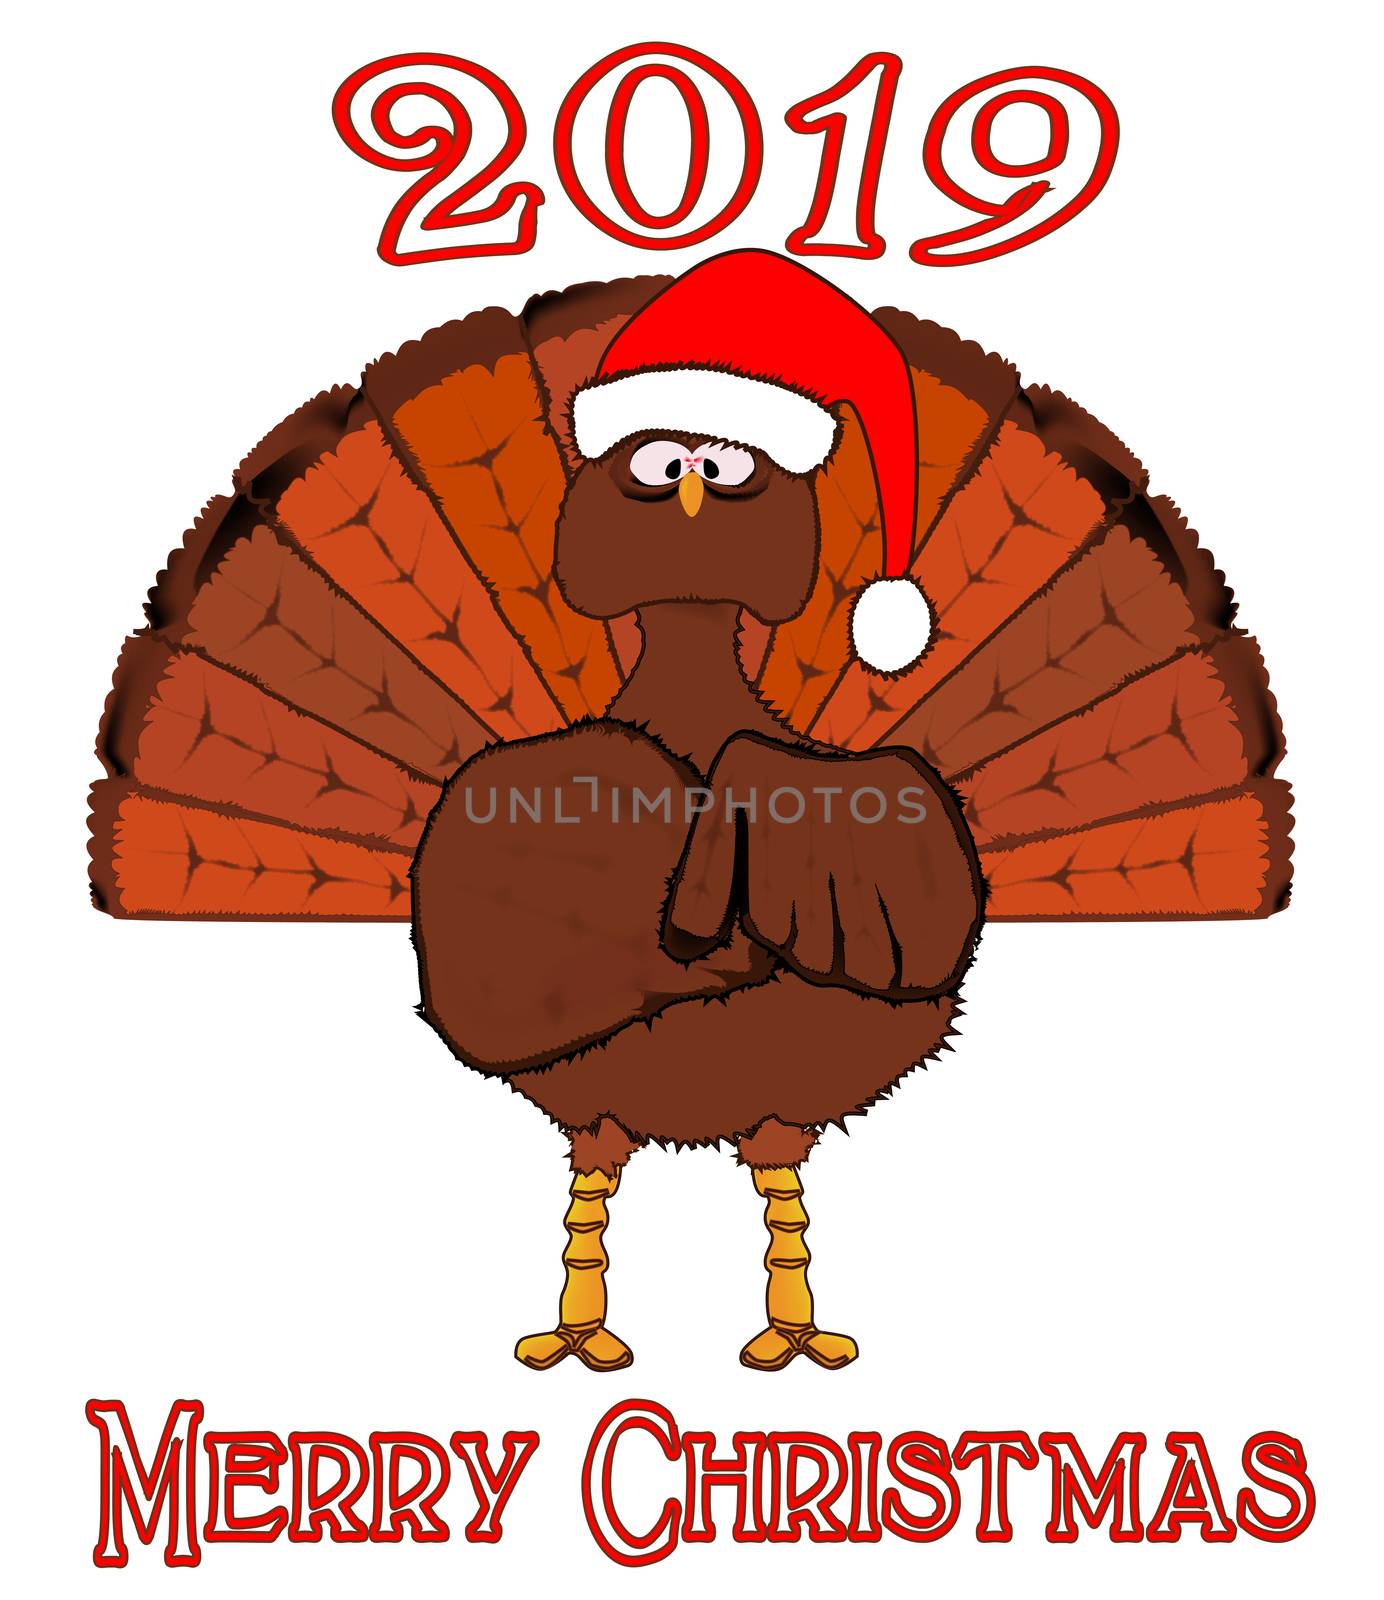 A Christmas Turkey with a message of Merry Christmas for 2019